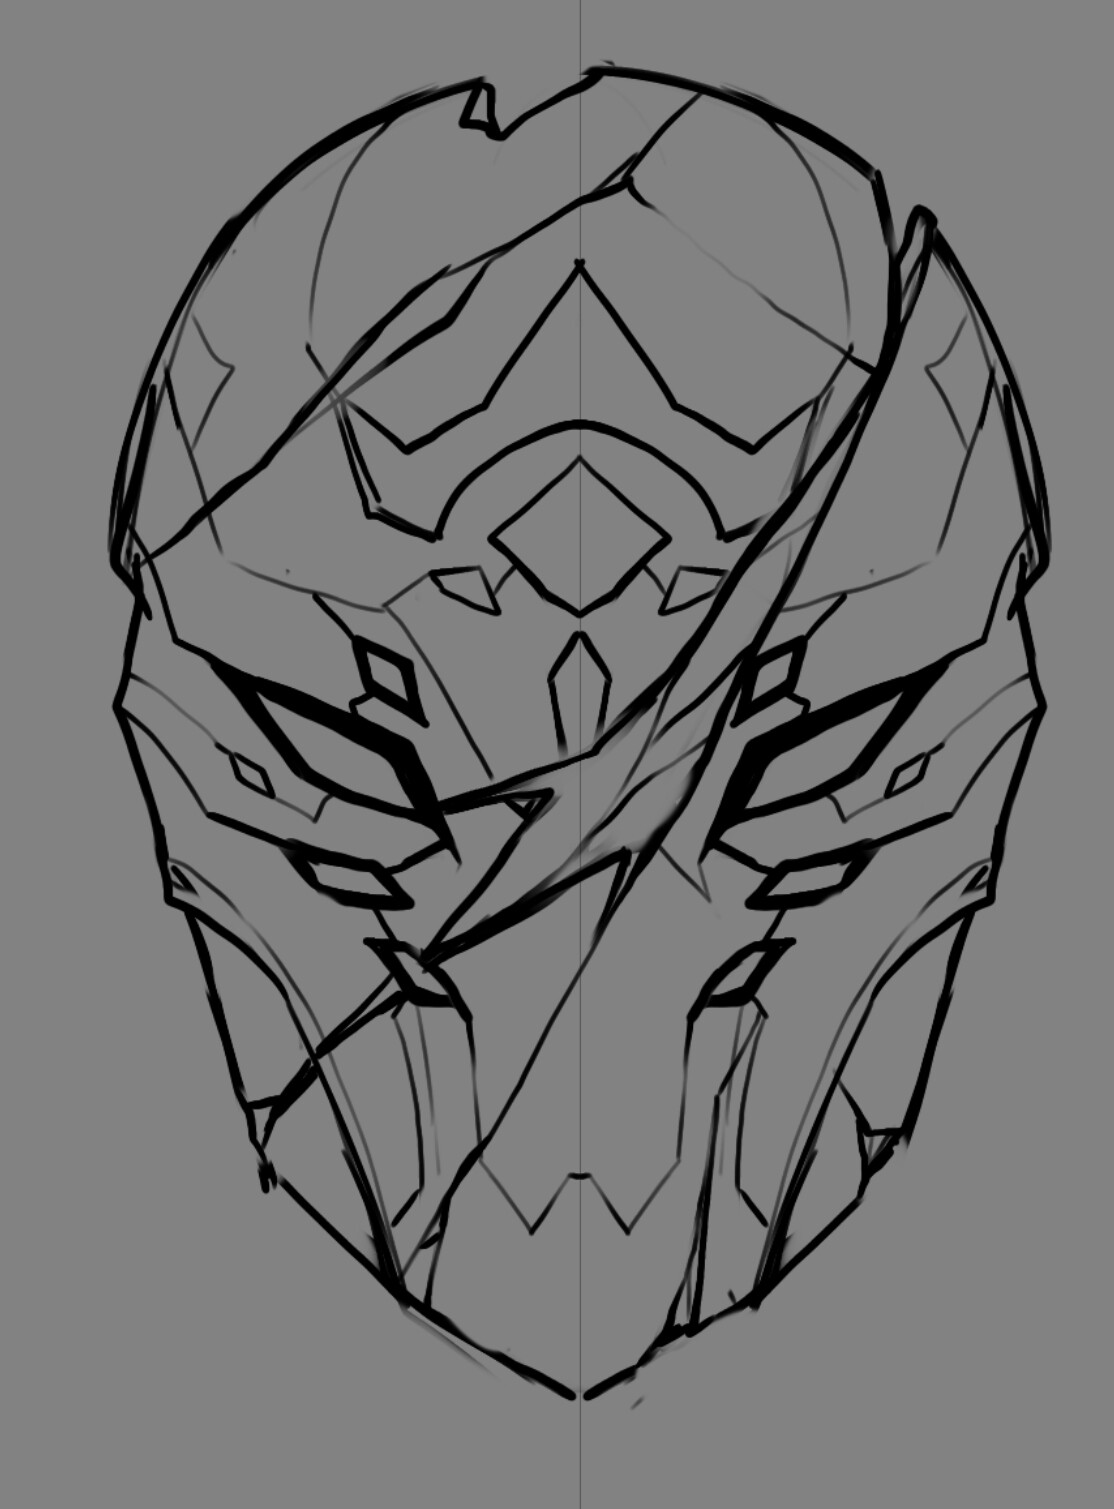 Mask exploration (ended up a bit more simplified in the final)